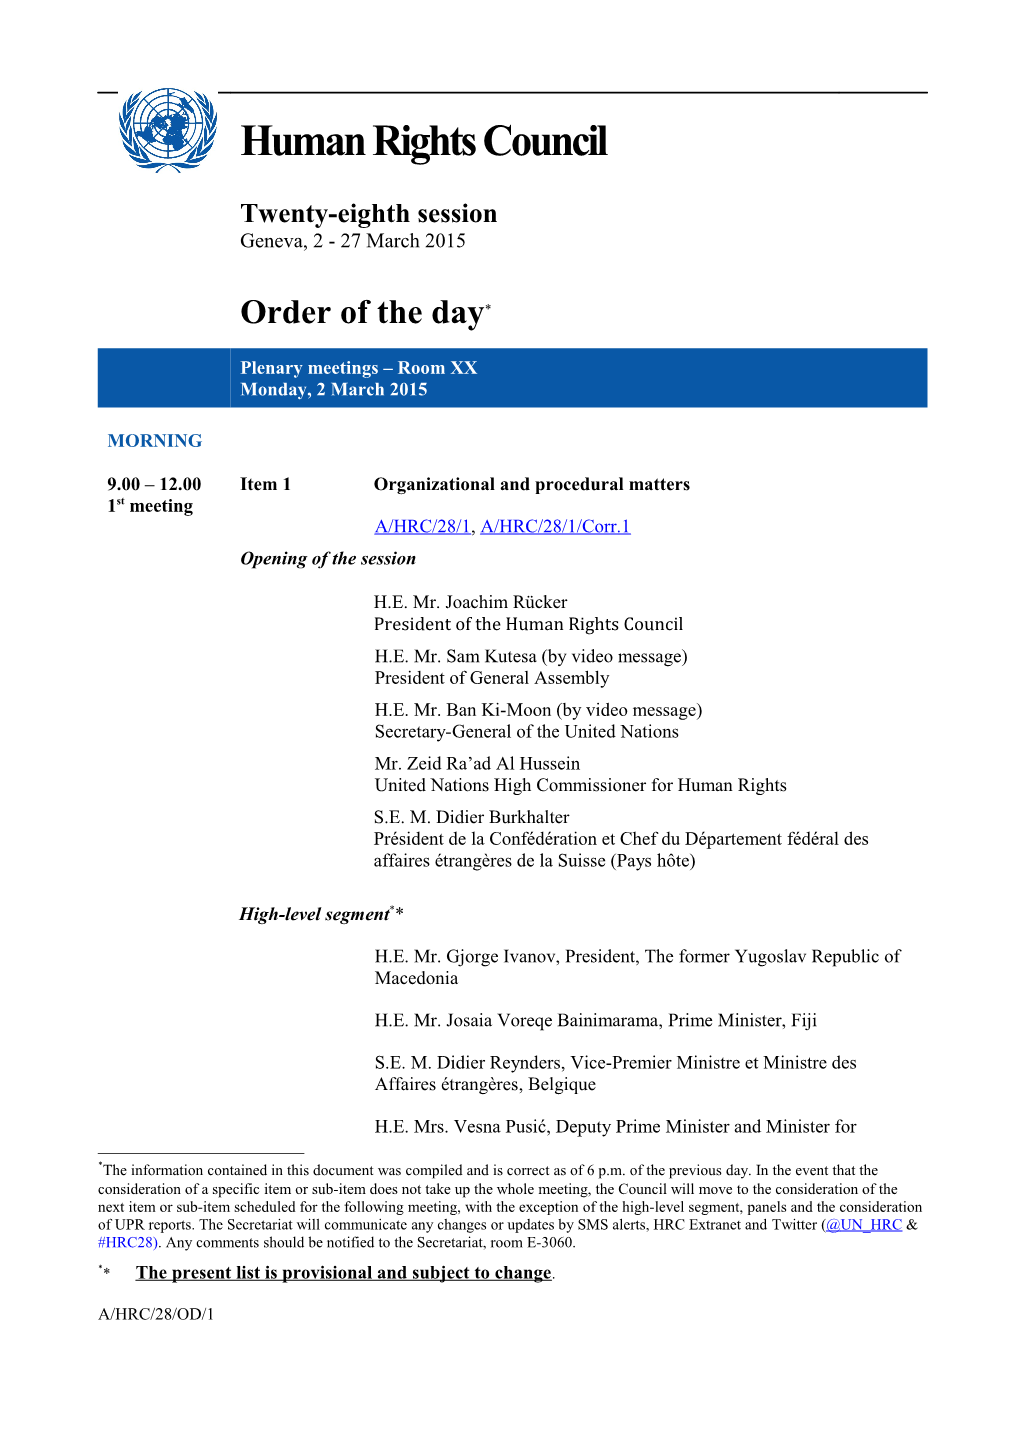 Order of the Day, Monday 2 March 2015